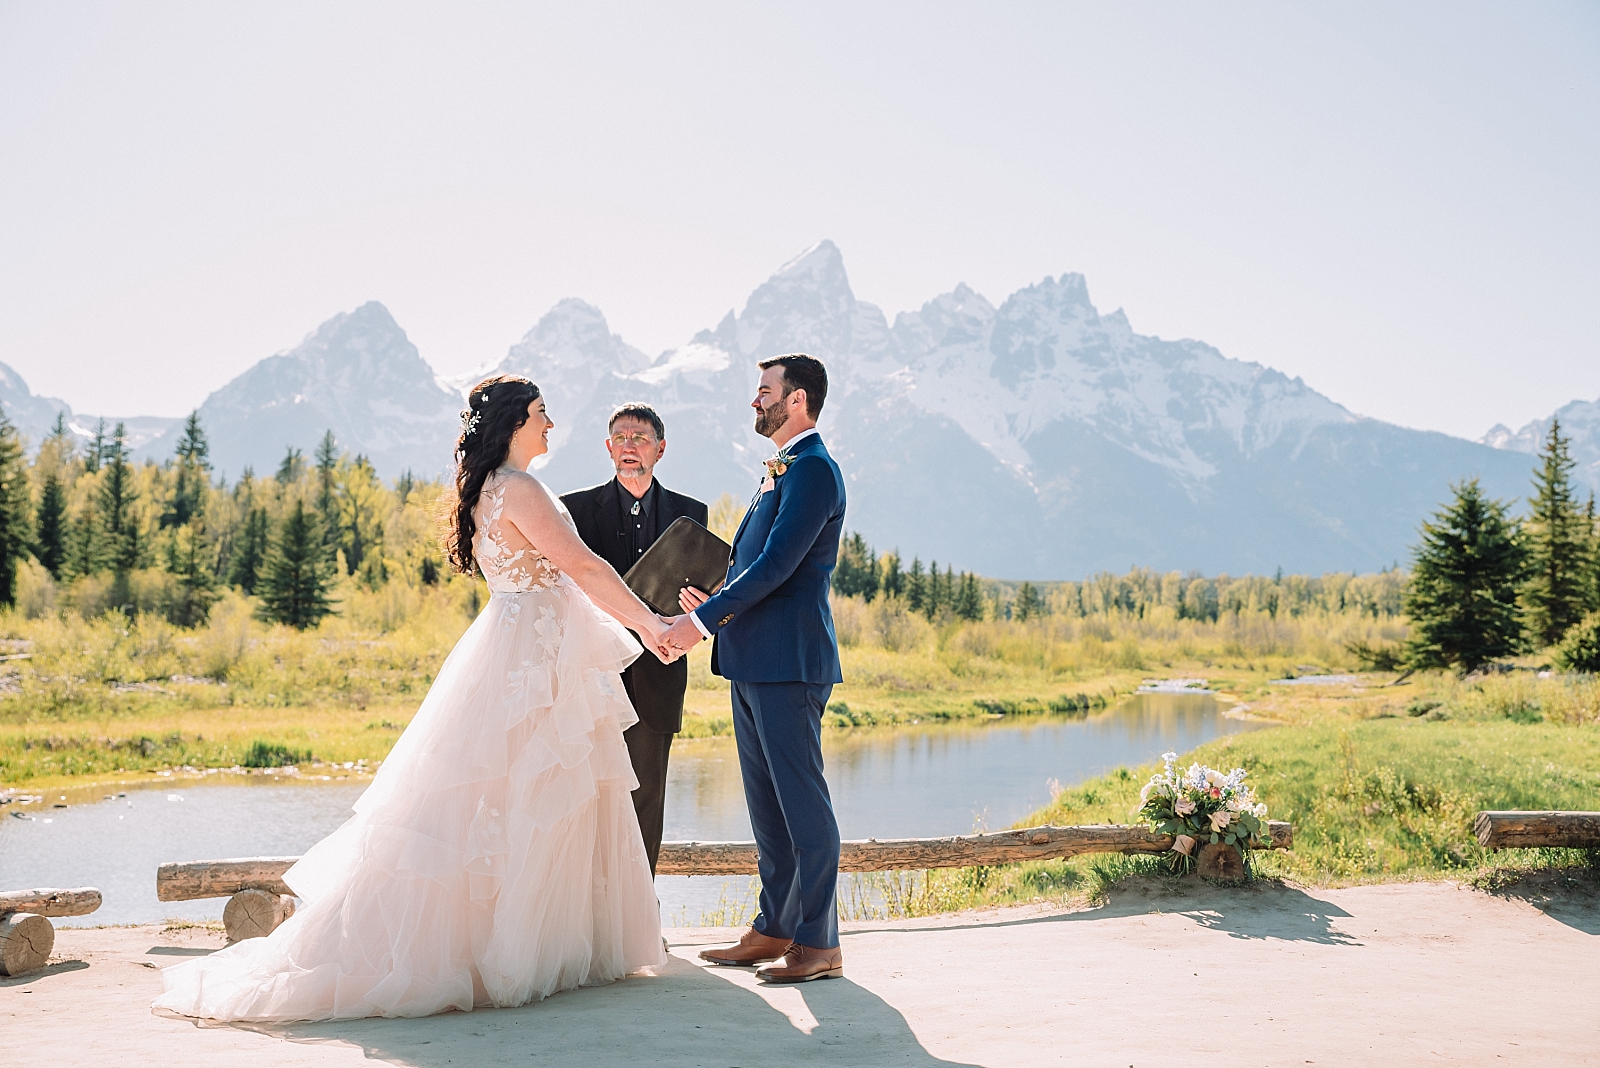 Couple elopes in intimate wedding ceremony at Schwabacher's Landing